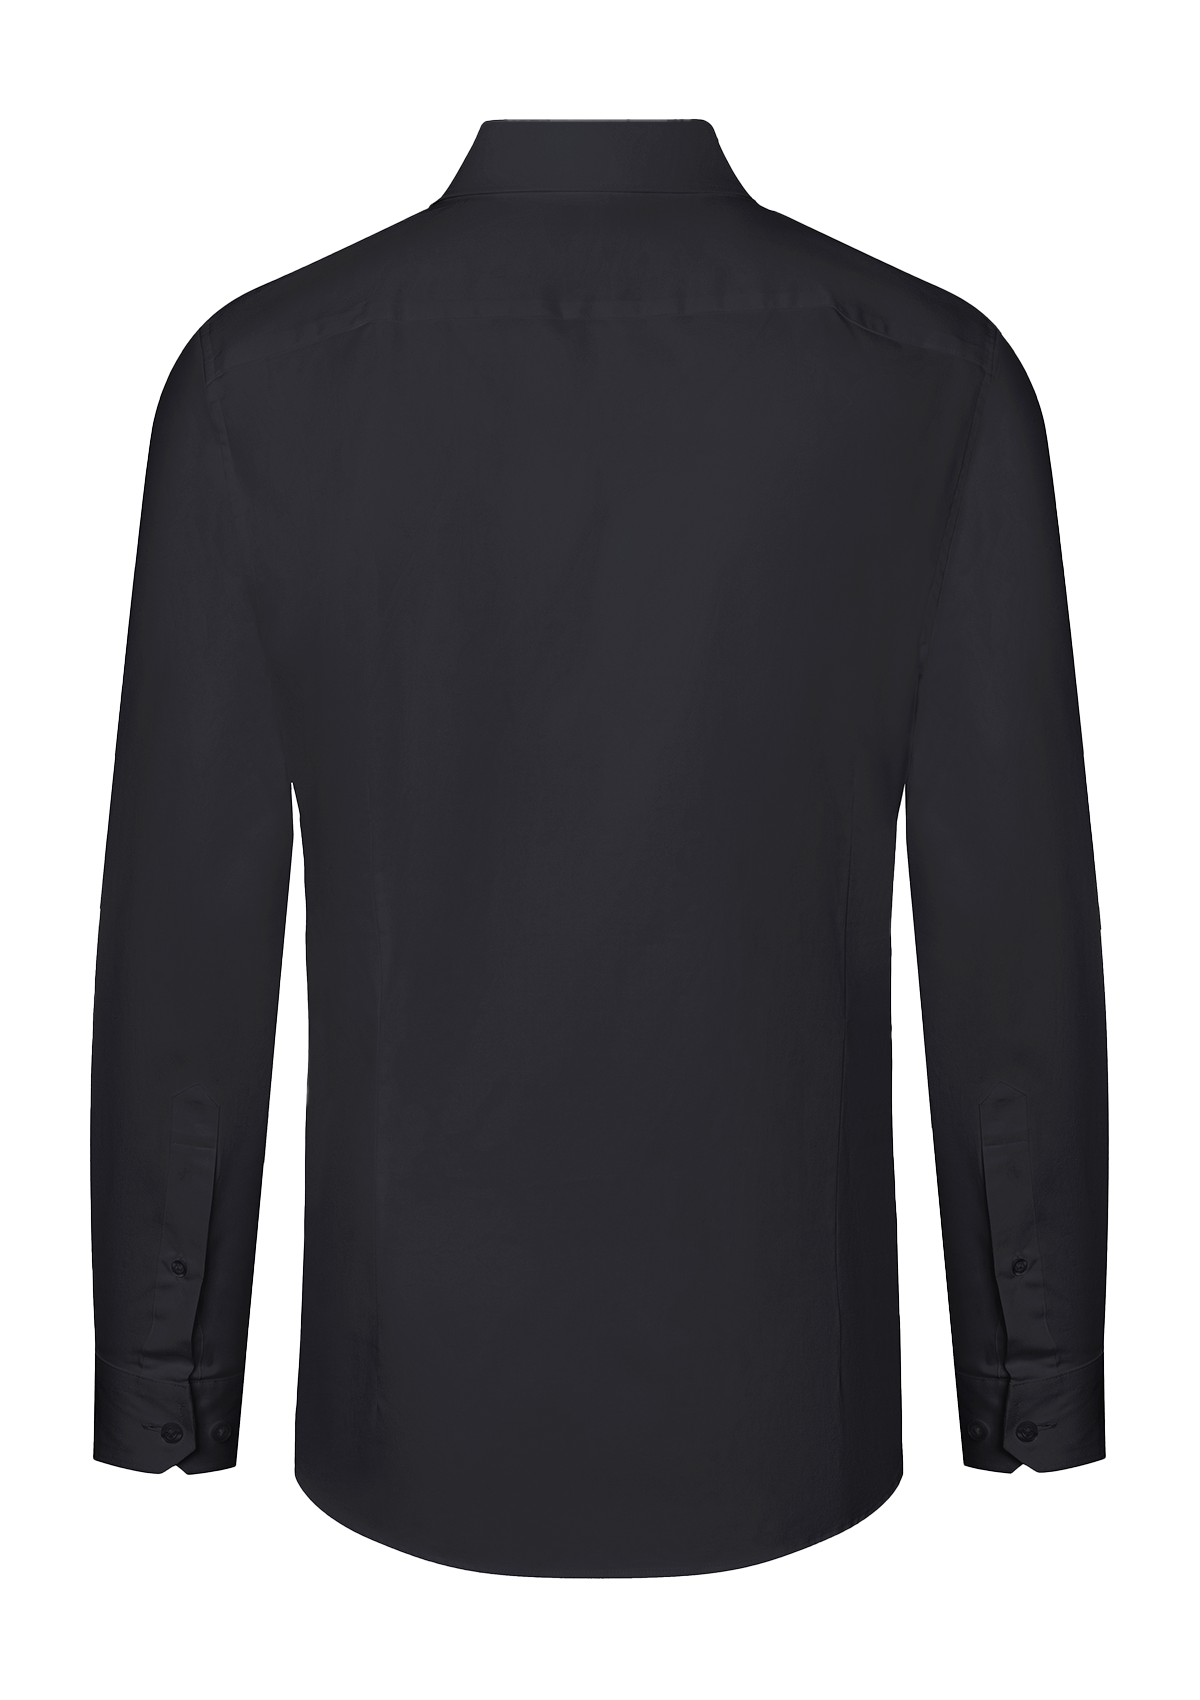 Men's Shirt Active-Stretch Long Sleeves Modern-Fit